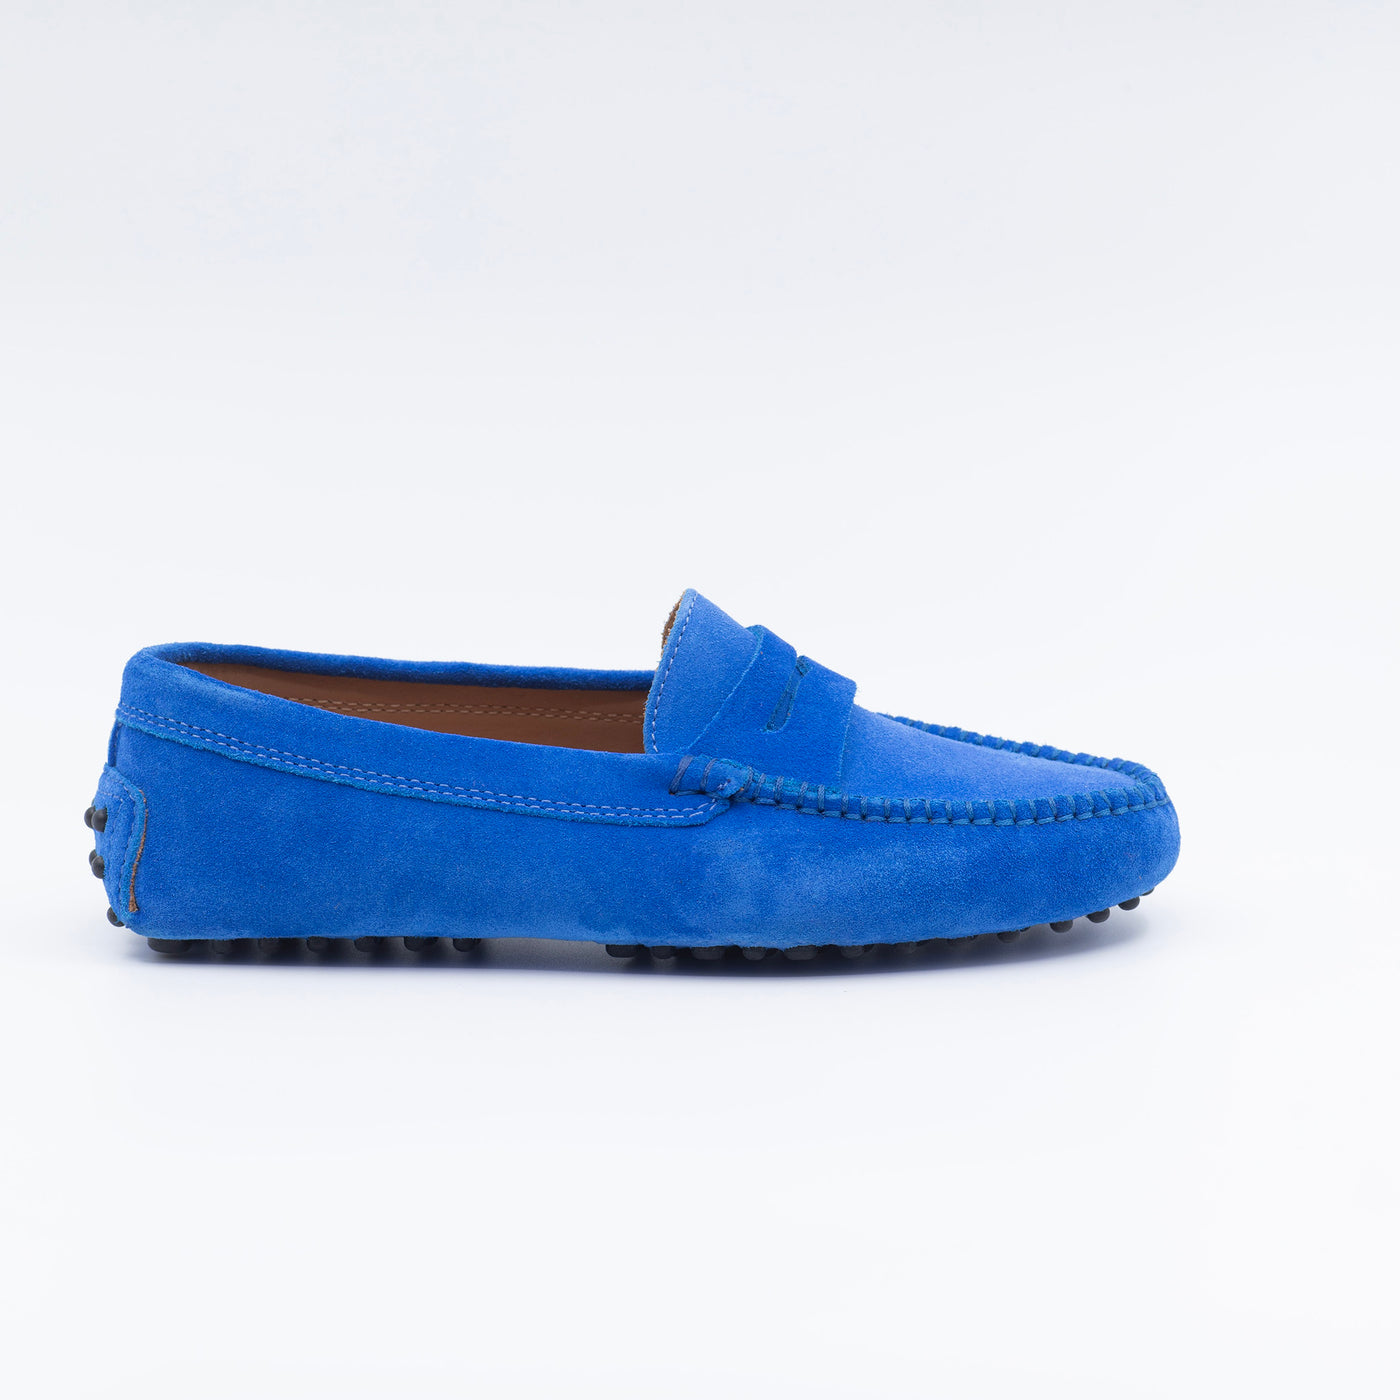 Women's blue suede leather loafer